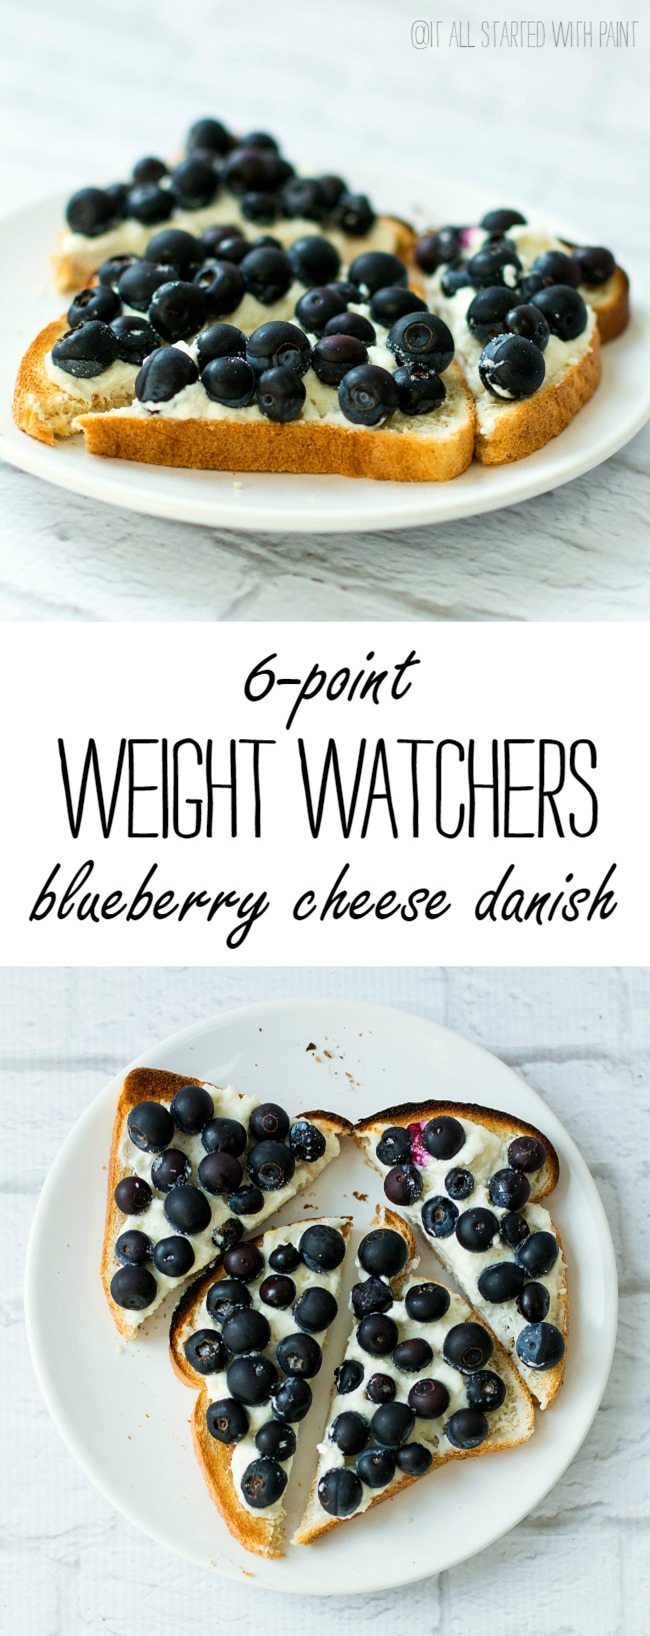 weight watchers breakfast - it all started with paint